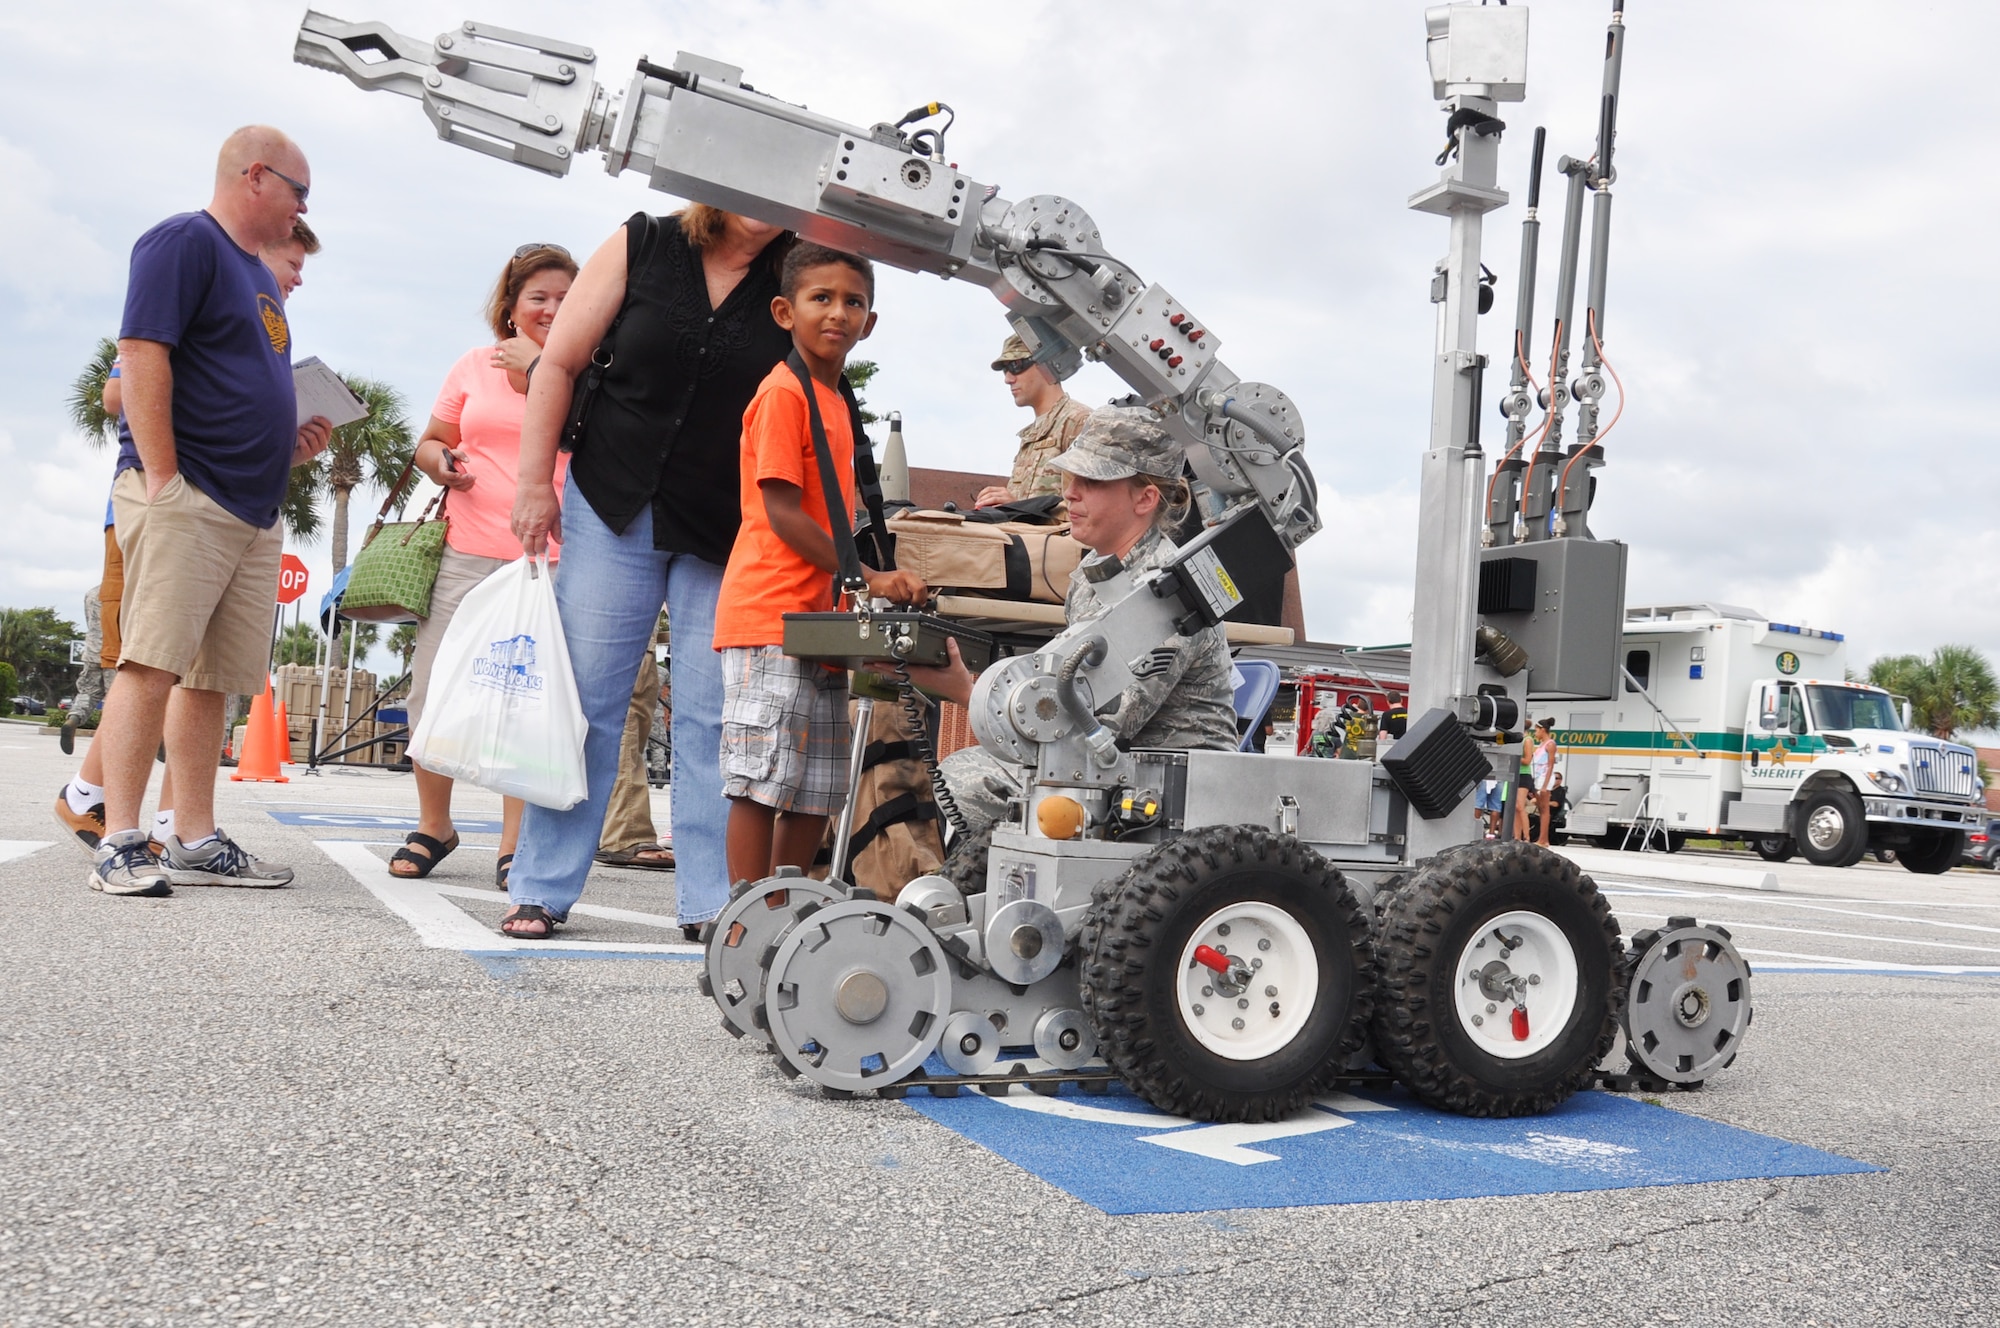 Staff Sgt. Amanda Ponce, 45th Civil Engineer Squadron Explosive Ordnance Disposal technician, teaches Josiah, 6, about the EOD’s F-6 Alpha reconnaissance robot during the 45th Space Wing’s All SySTEMs Go event June 11, 2016, at the Youth Center/Shark Center at Patrick Air Force Base. The robot is used by EOD members to neutralize explosives. (U.S. Air Force Photo/Tech. Sgt. Erin Smith/Released)